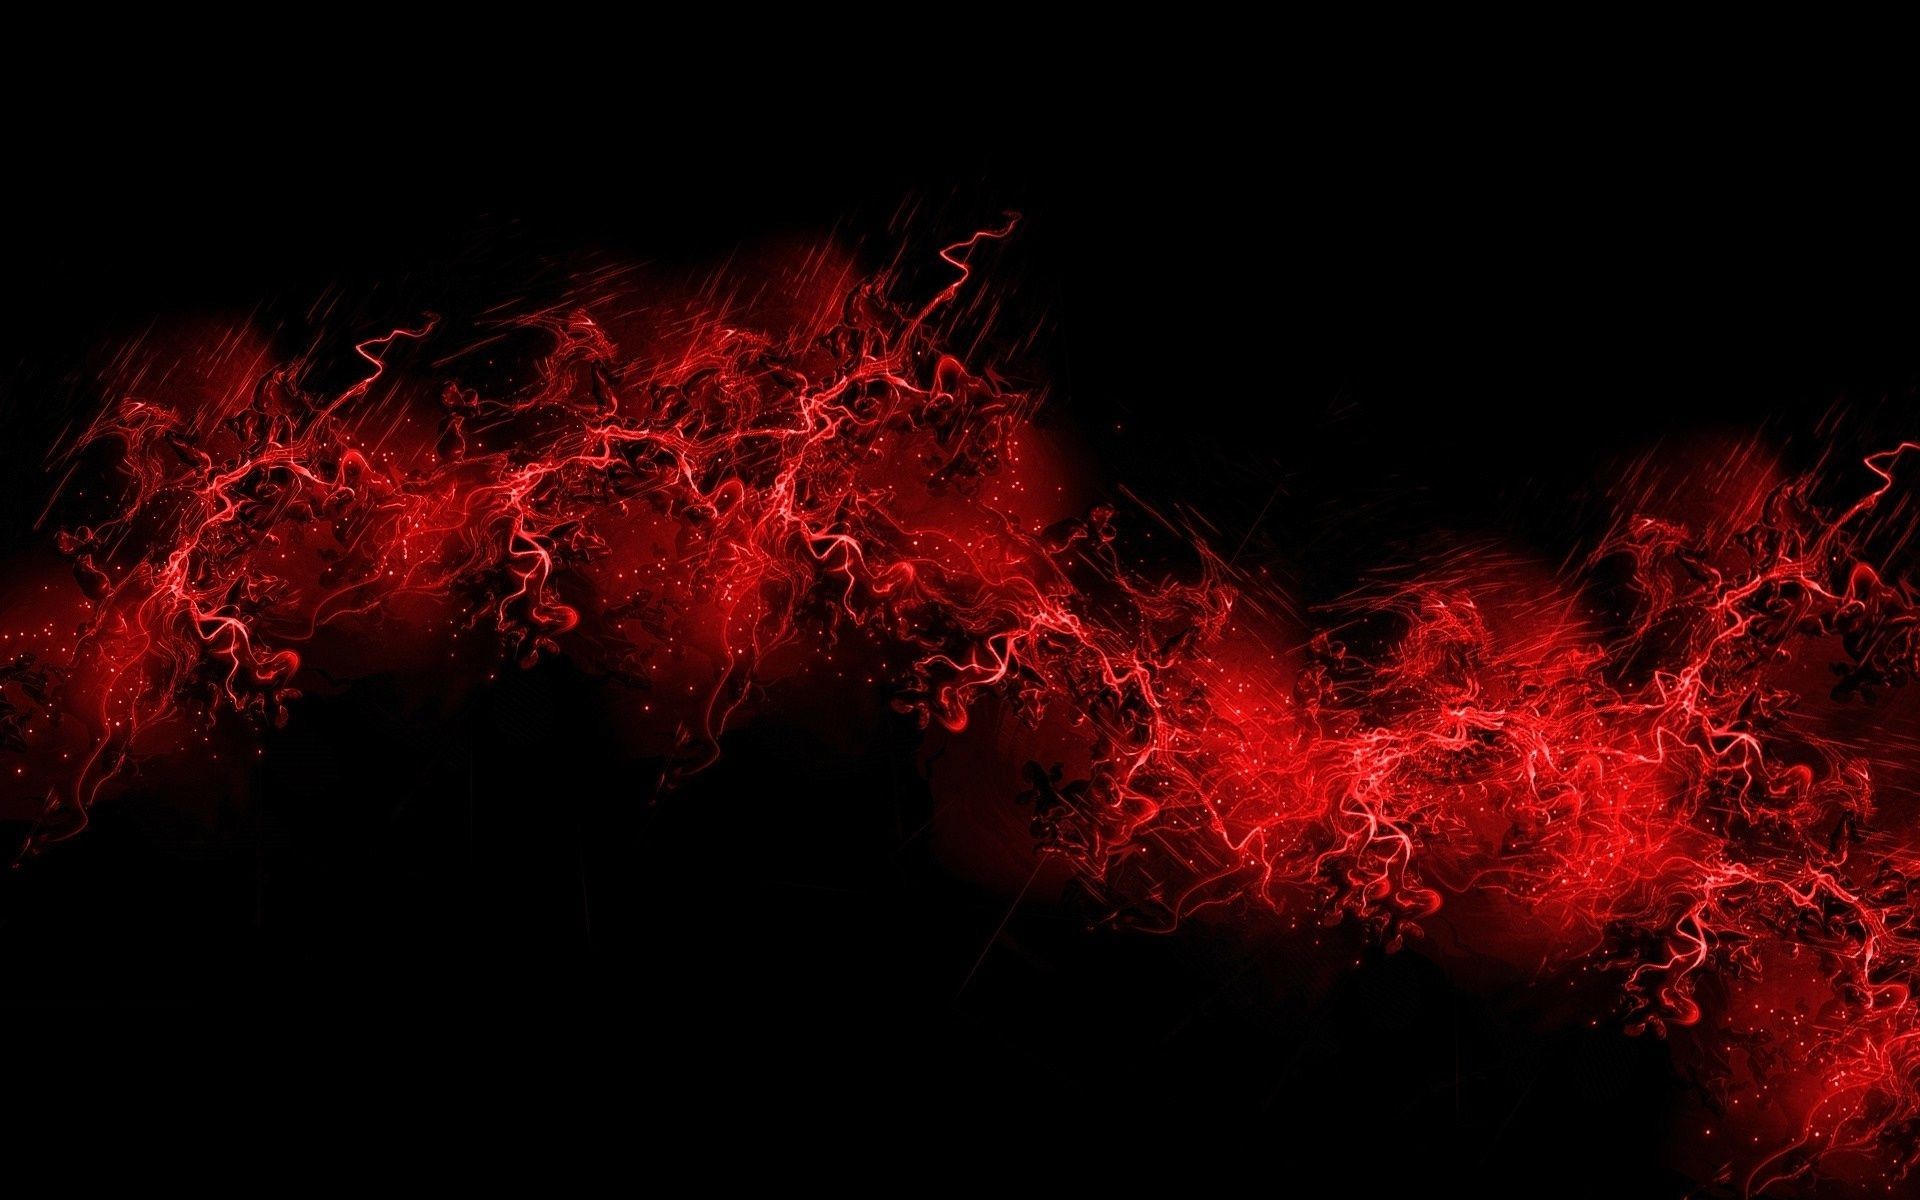 1920x1200 Dark Red Abstract Backgrounds Hd Widescreen 11 HD Wallpapers #6003